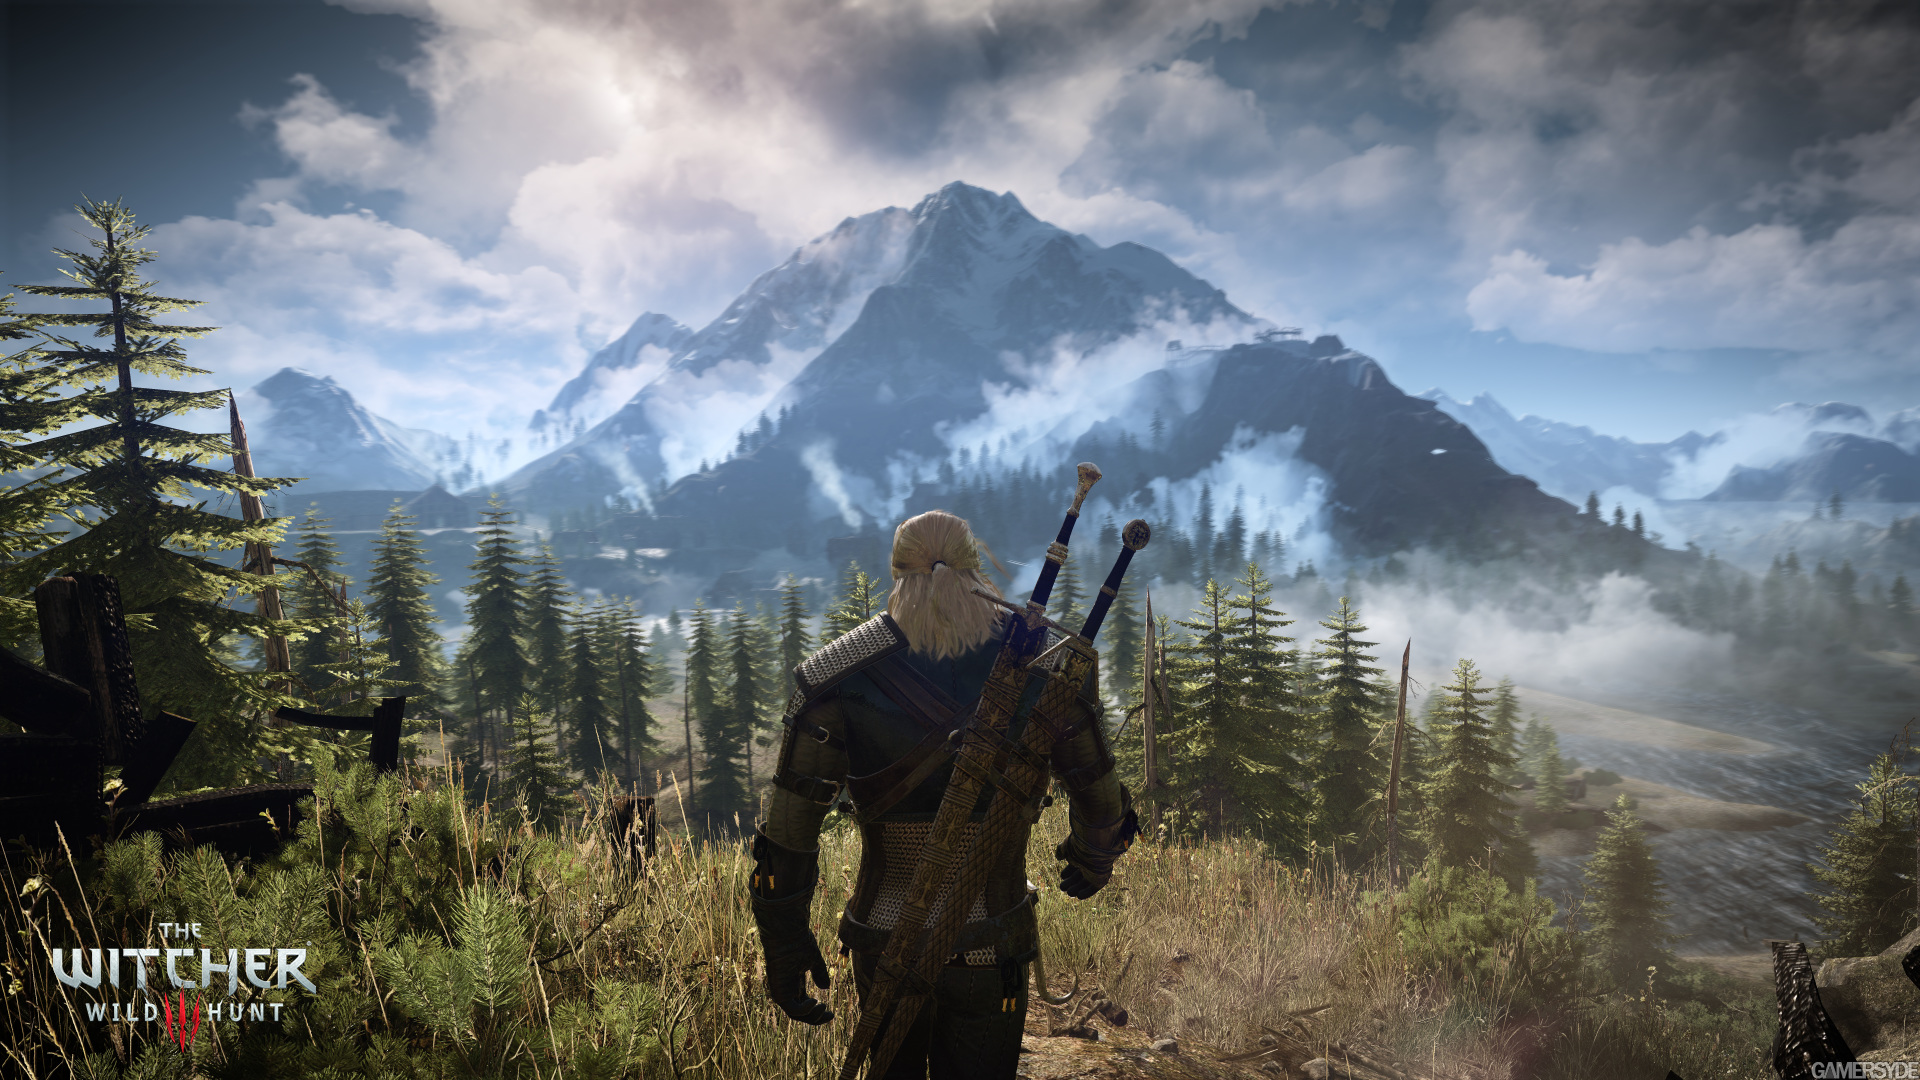 image_the_witcher_3_wild_hunt-25218-2651